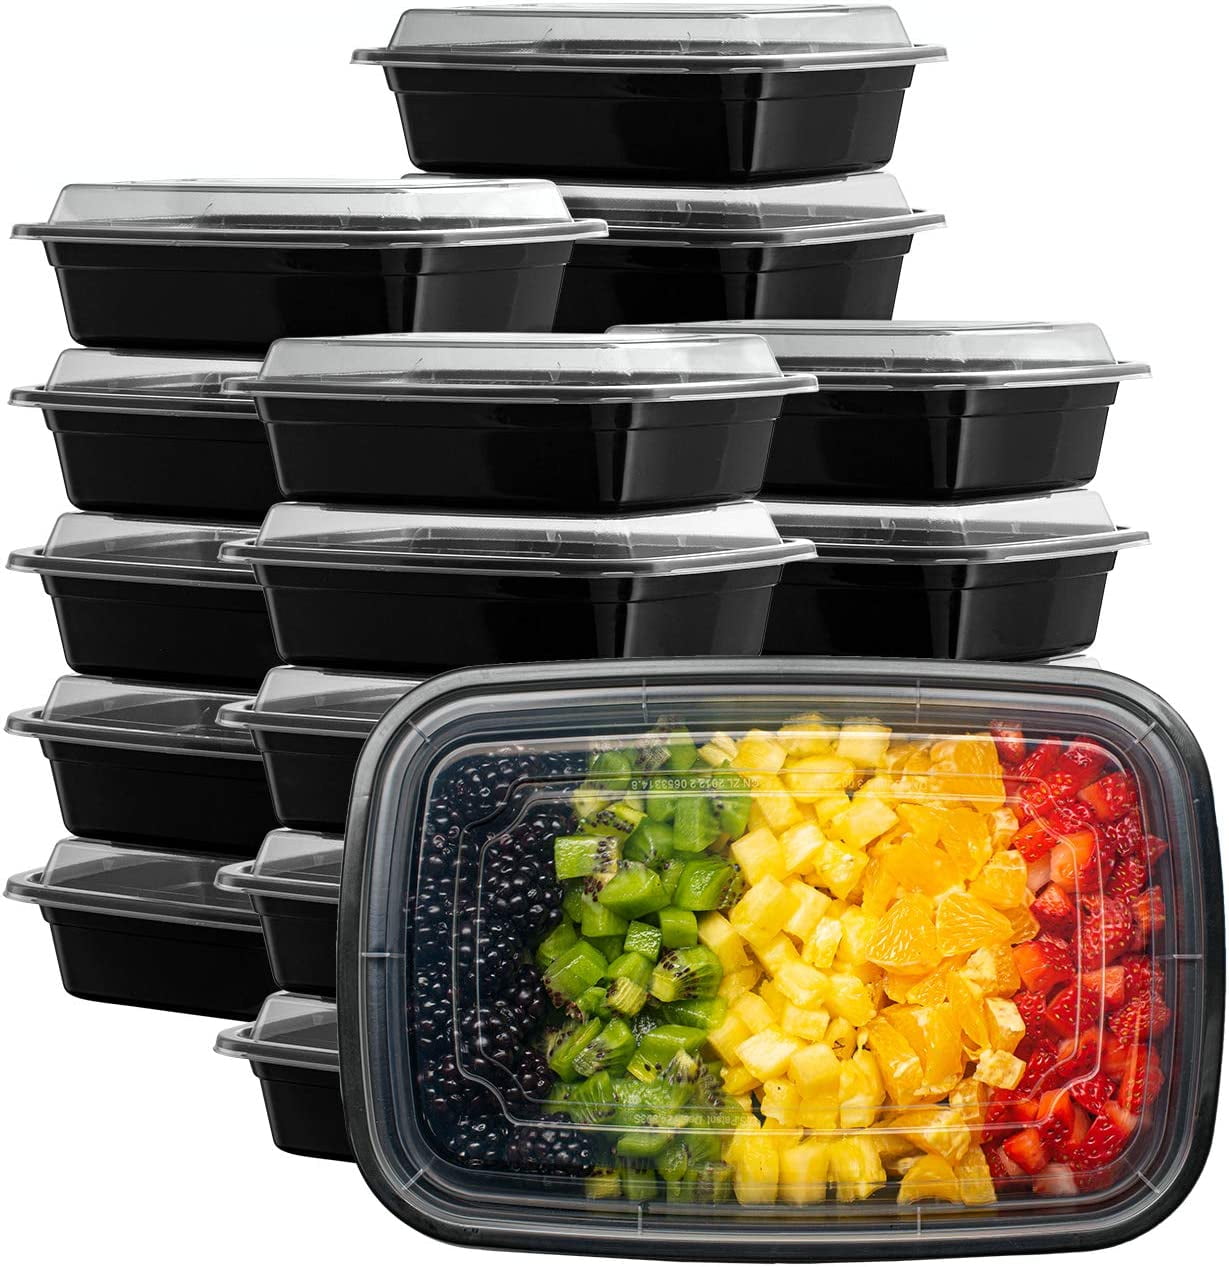 LEOBOX Meal Prep Containers, 65 Pack Clamshell Food Containers 7.8 Inch  Black 3 Compartment To Go Containers